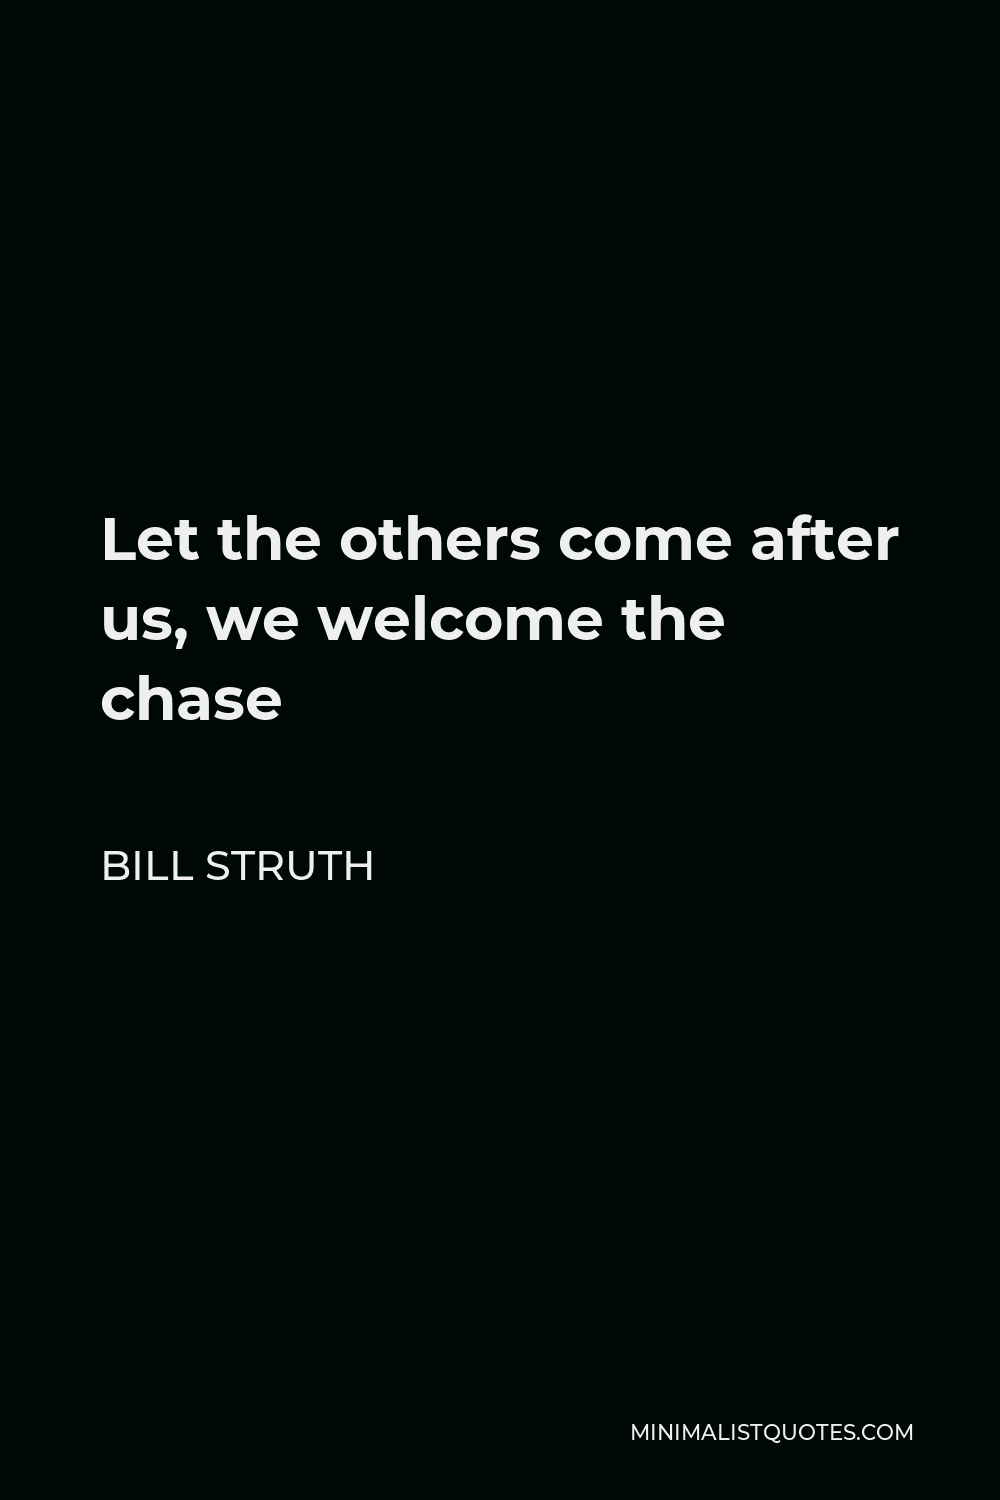 Bill Struth Quote - Let the others come after us, we welcome the chase